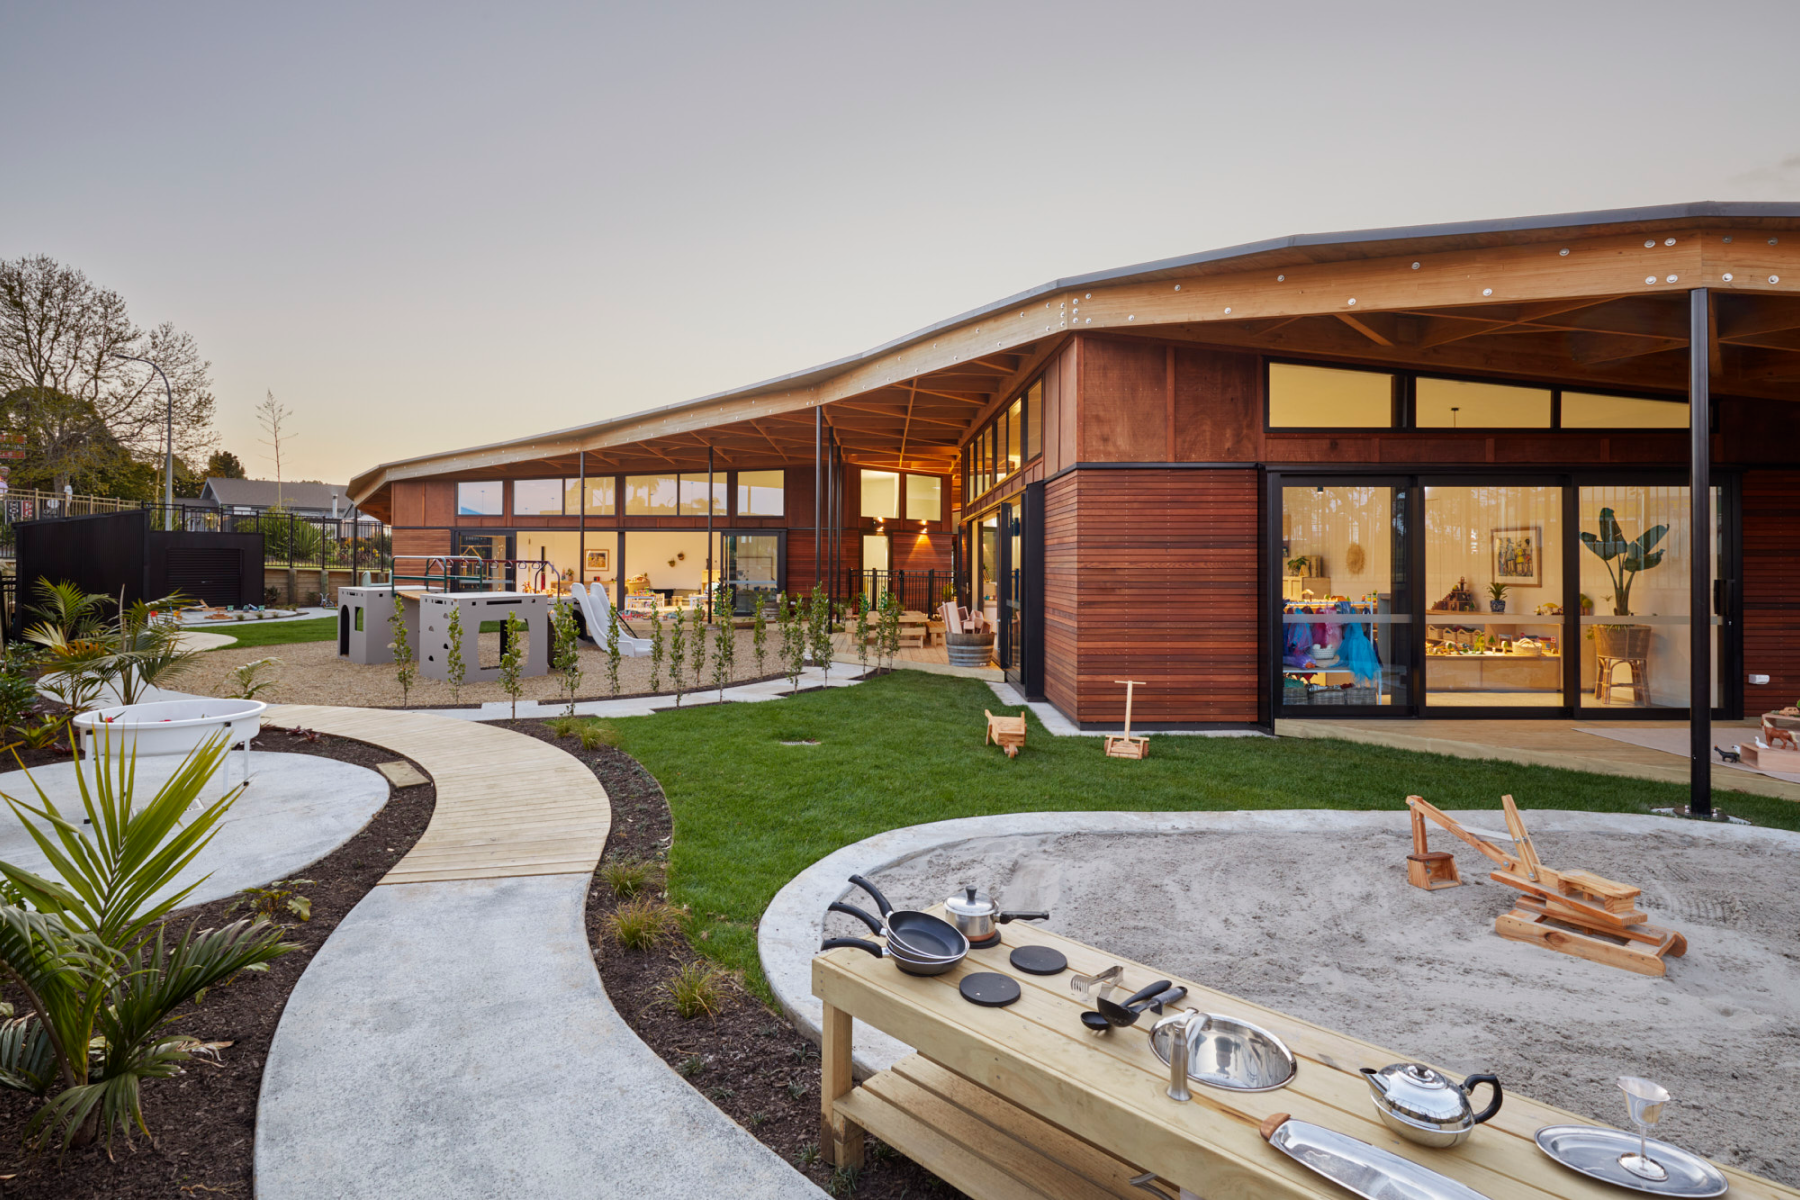 Wooden childcare centre with playground, sandpit, and sunset